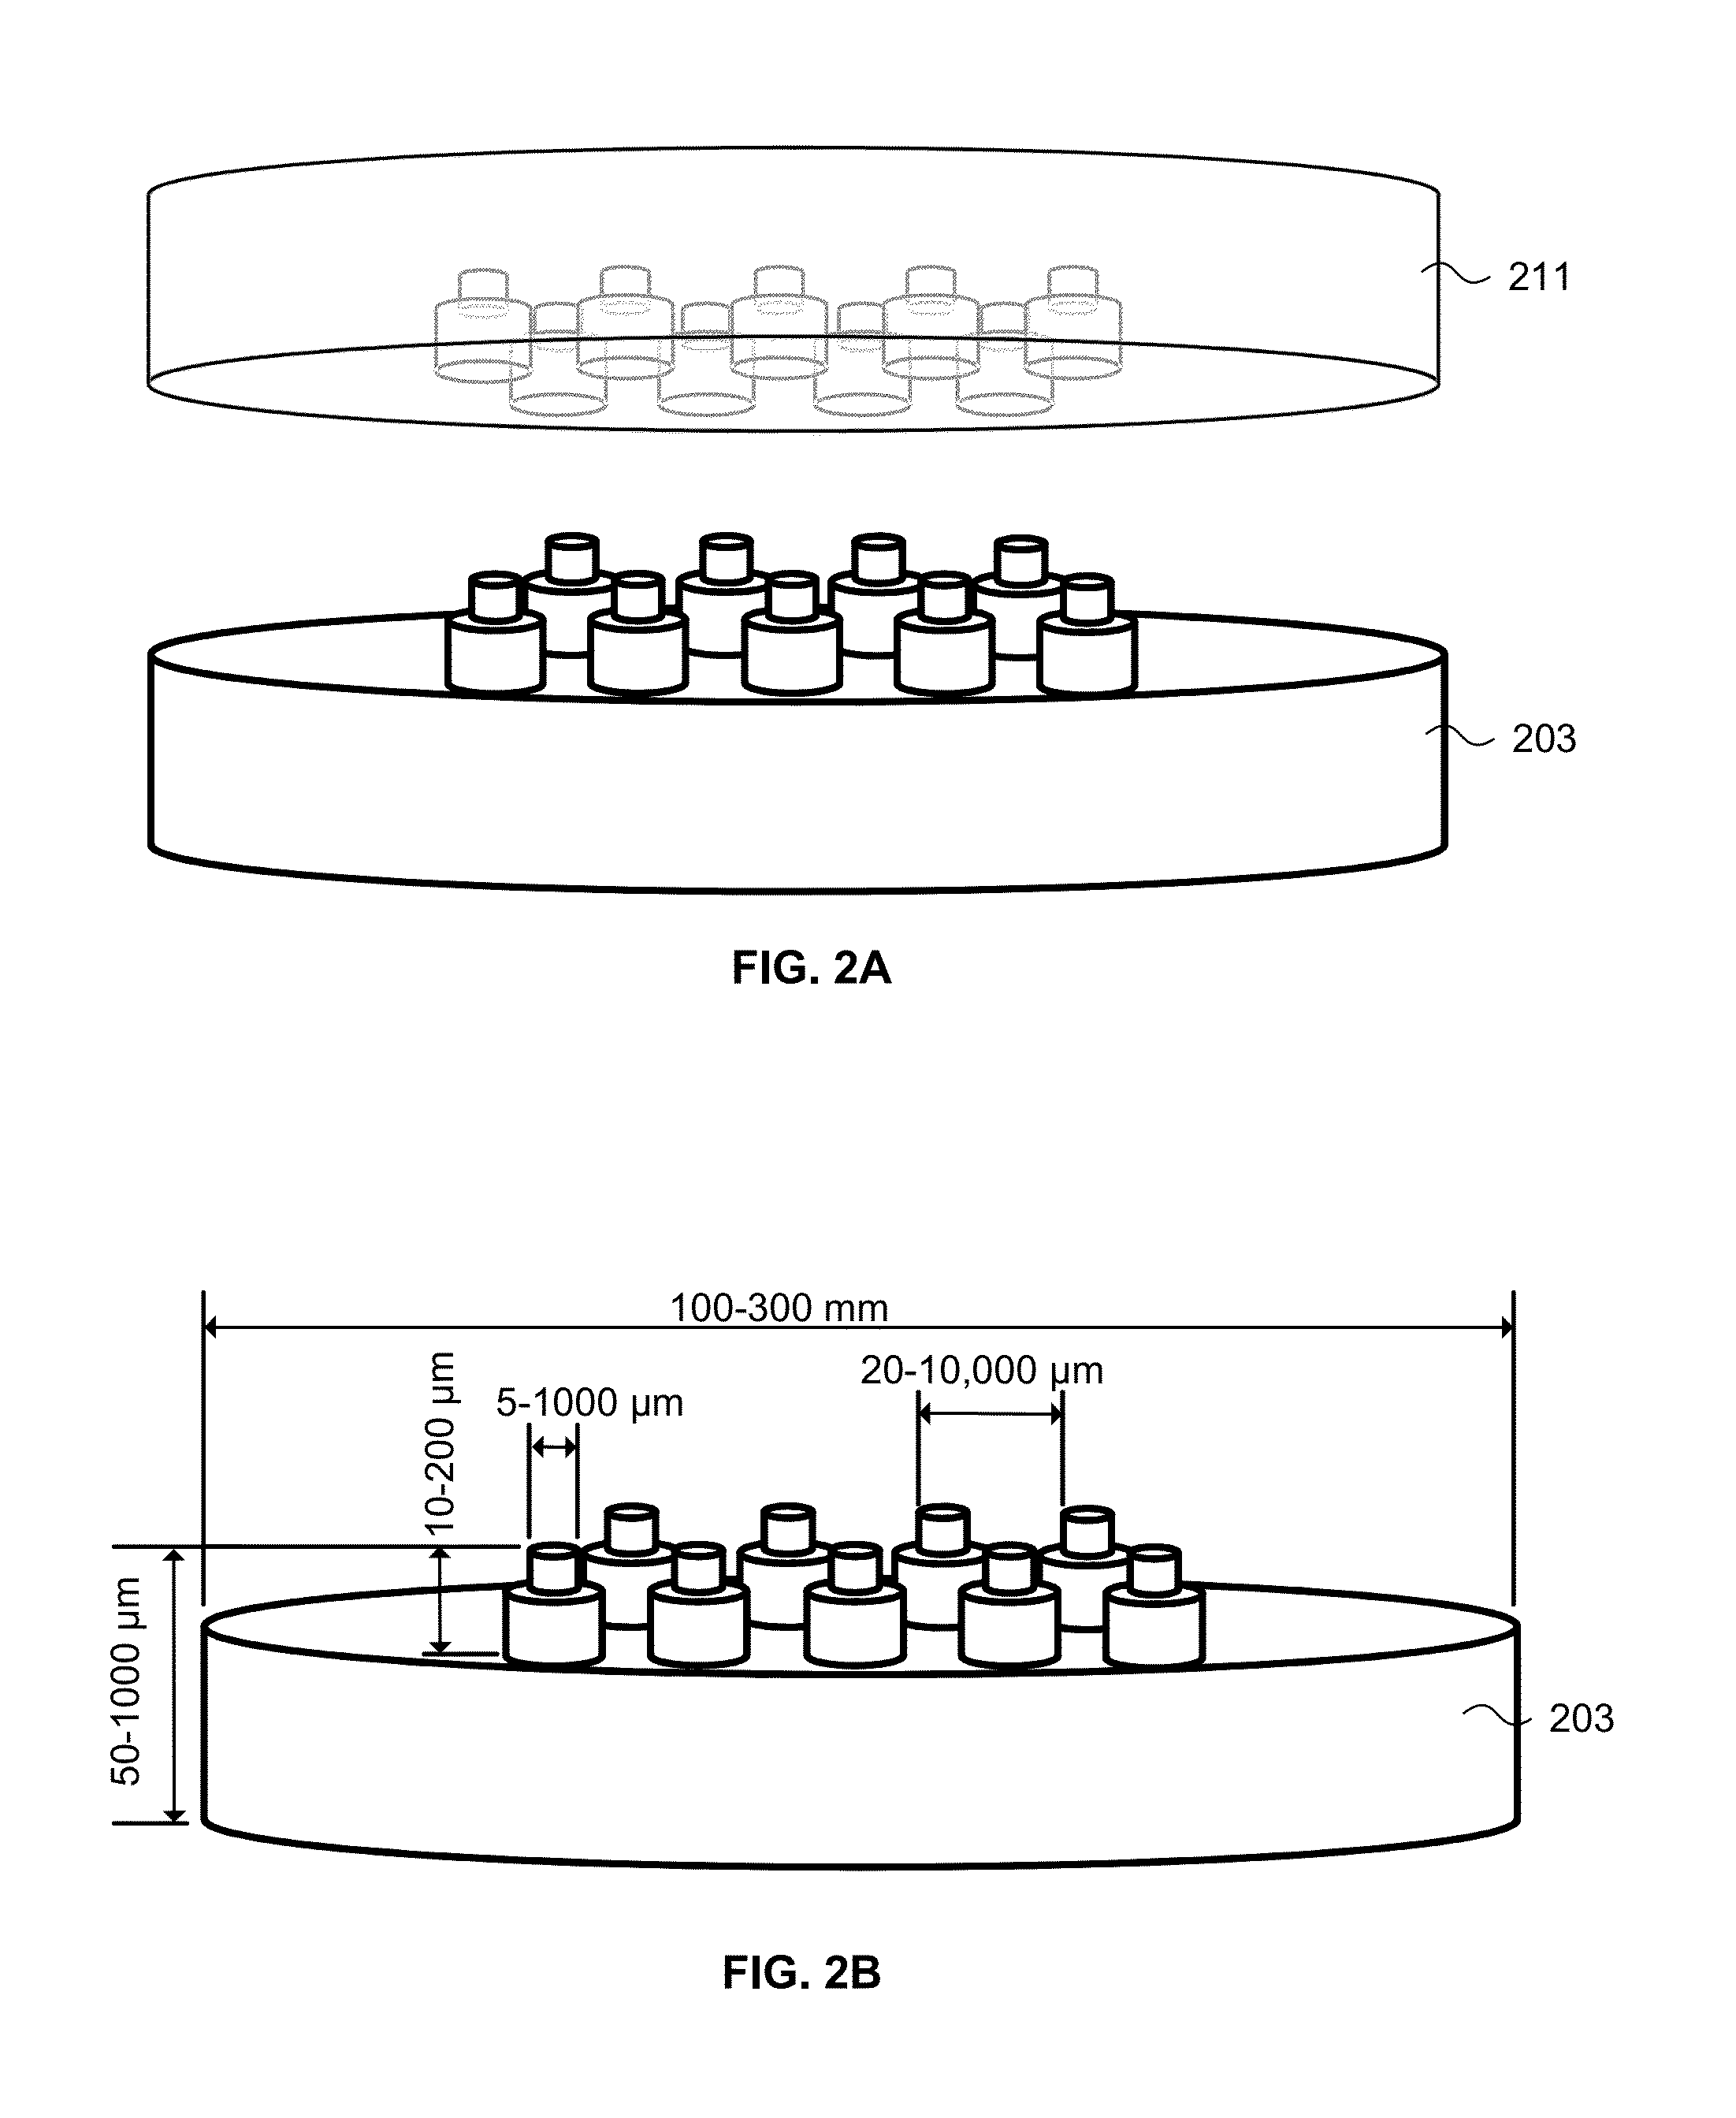 Batch Methods of Forming Microscale or Millimeter Scale Structures Using Electro Discharge Machining Alone or In Combination with Other Fabrication Methods